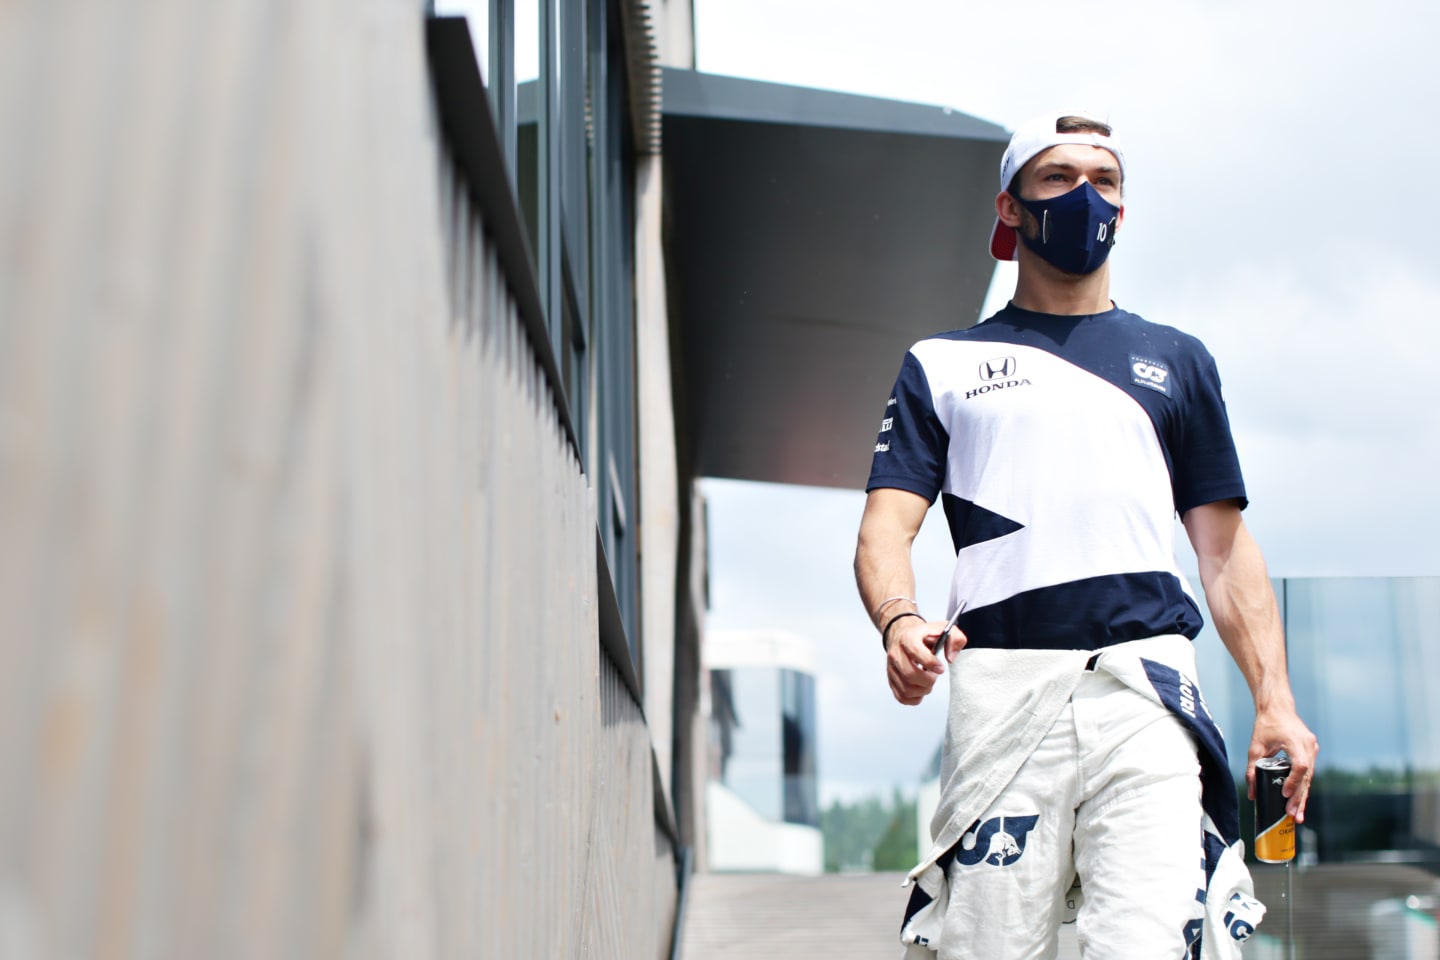 SPIELBERG, AUSTRIA - JUNE 25: Pierre Gasly of France and Scuderia AlphaTauri walks in the Paddock during practice ahead of the F1 Grand Prix of Styria at Red Bull Ring on June 25, 2021 in Spielberg, Austria. (Photo by Peter Fox/Getty Images)